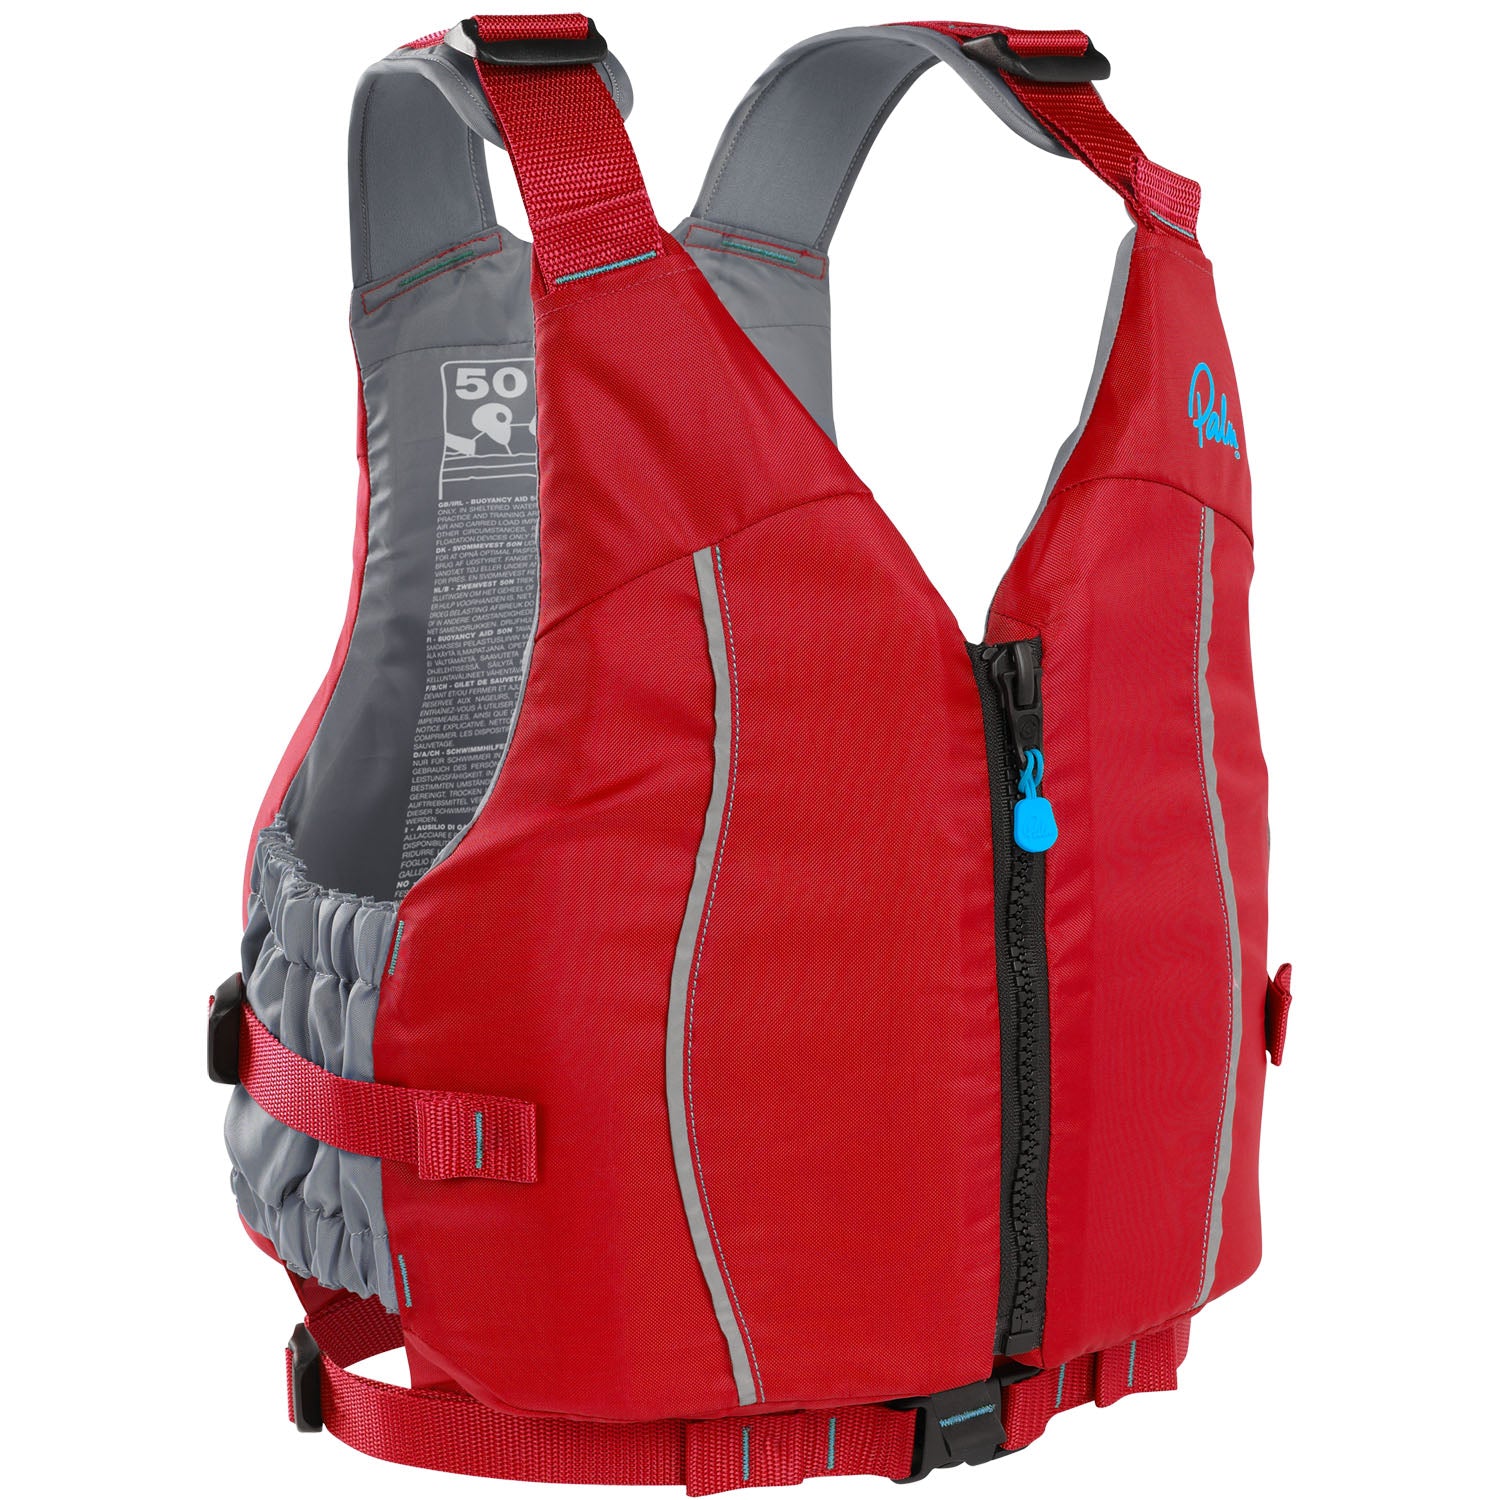 Palm Quest Buoyancy Aid in Red